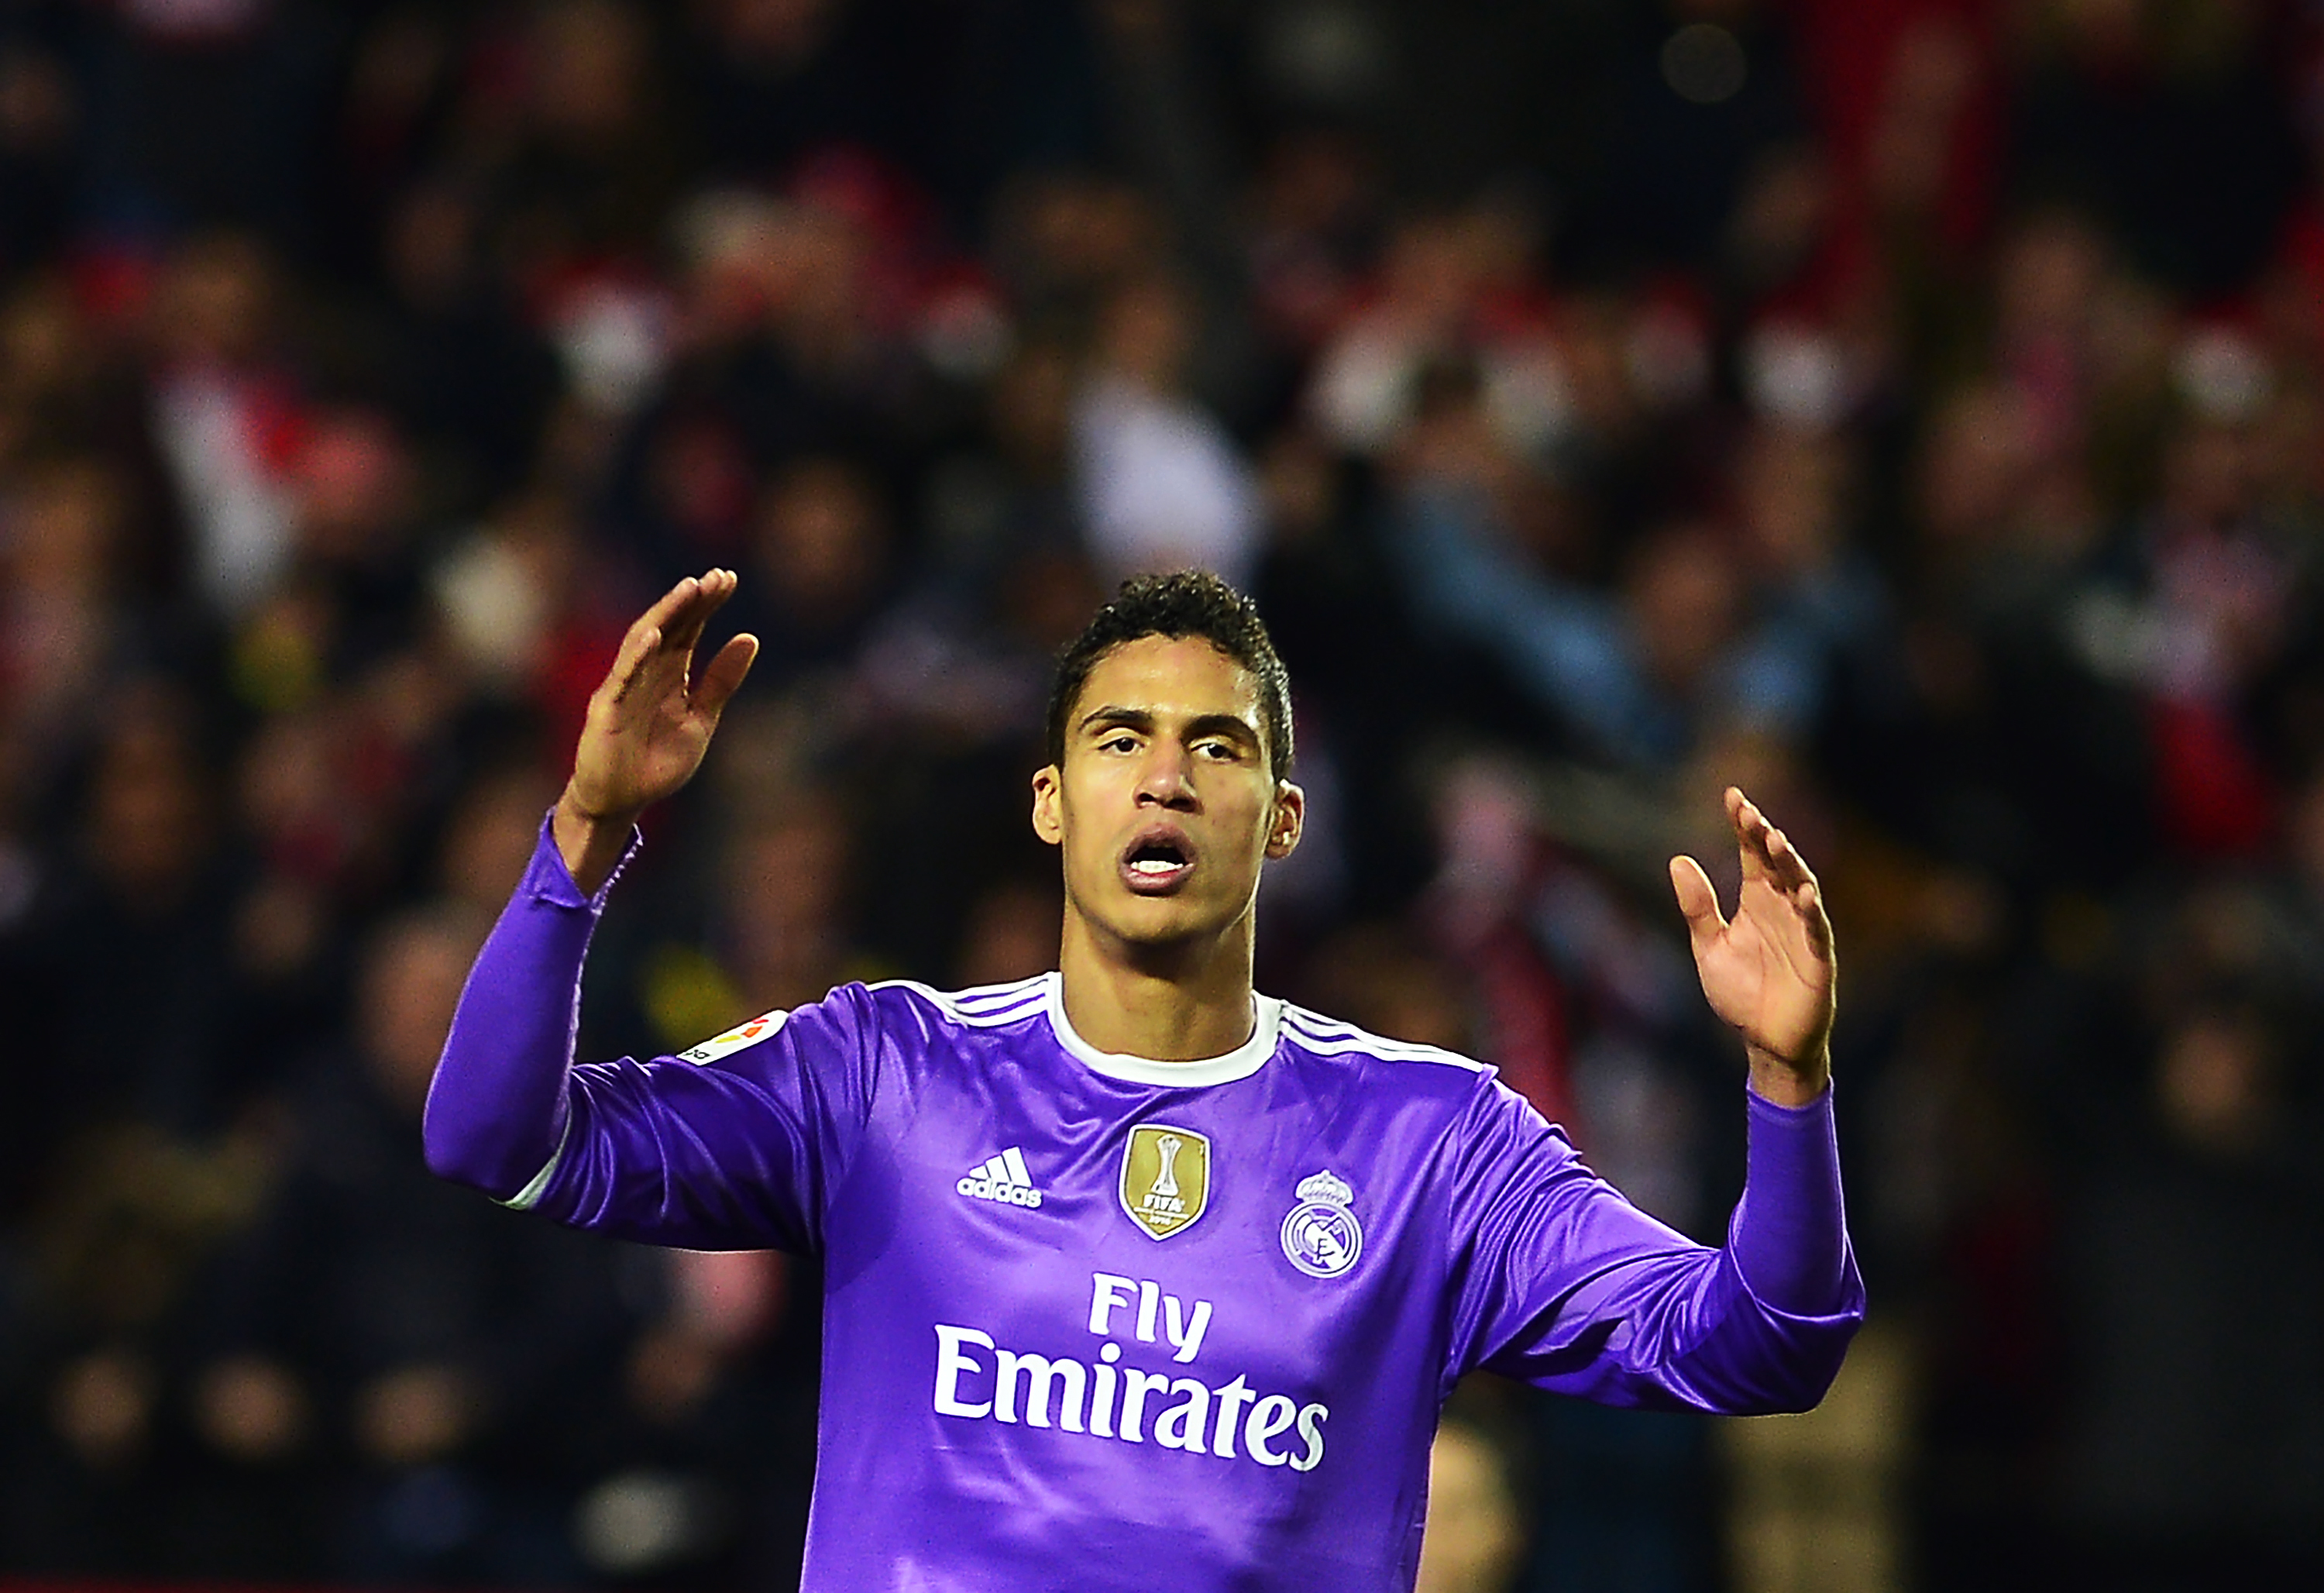 Real Madrid's French defender Raphael Varane gestures during the Spanish league football match Sevilla FC vs Real Madrid CF at the Ramon Sanchez Pizjuan stadium in Sevilla on January 15, 2017.
Sevilla won 2-1. / AFP / CRISTINA QUICLER        (Photo credit should read CRISTINA QUICLER/AFP/Getty Images)